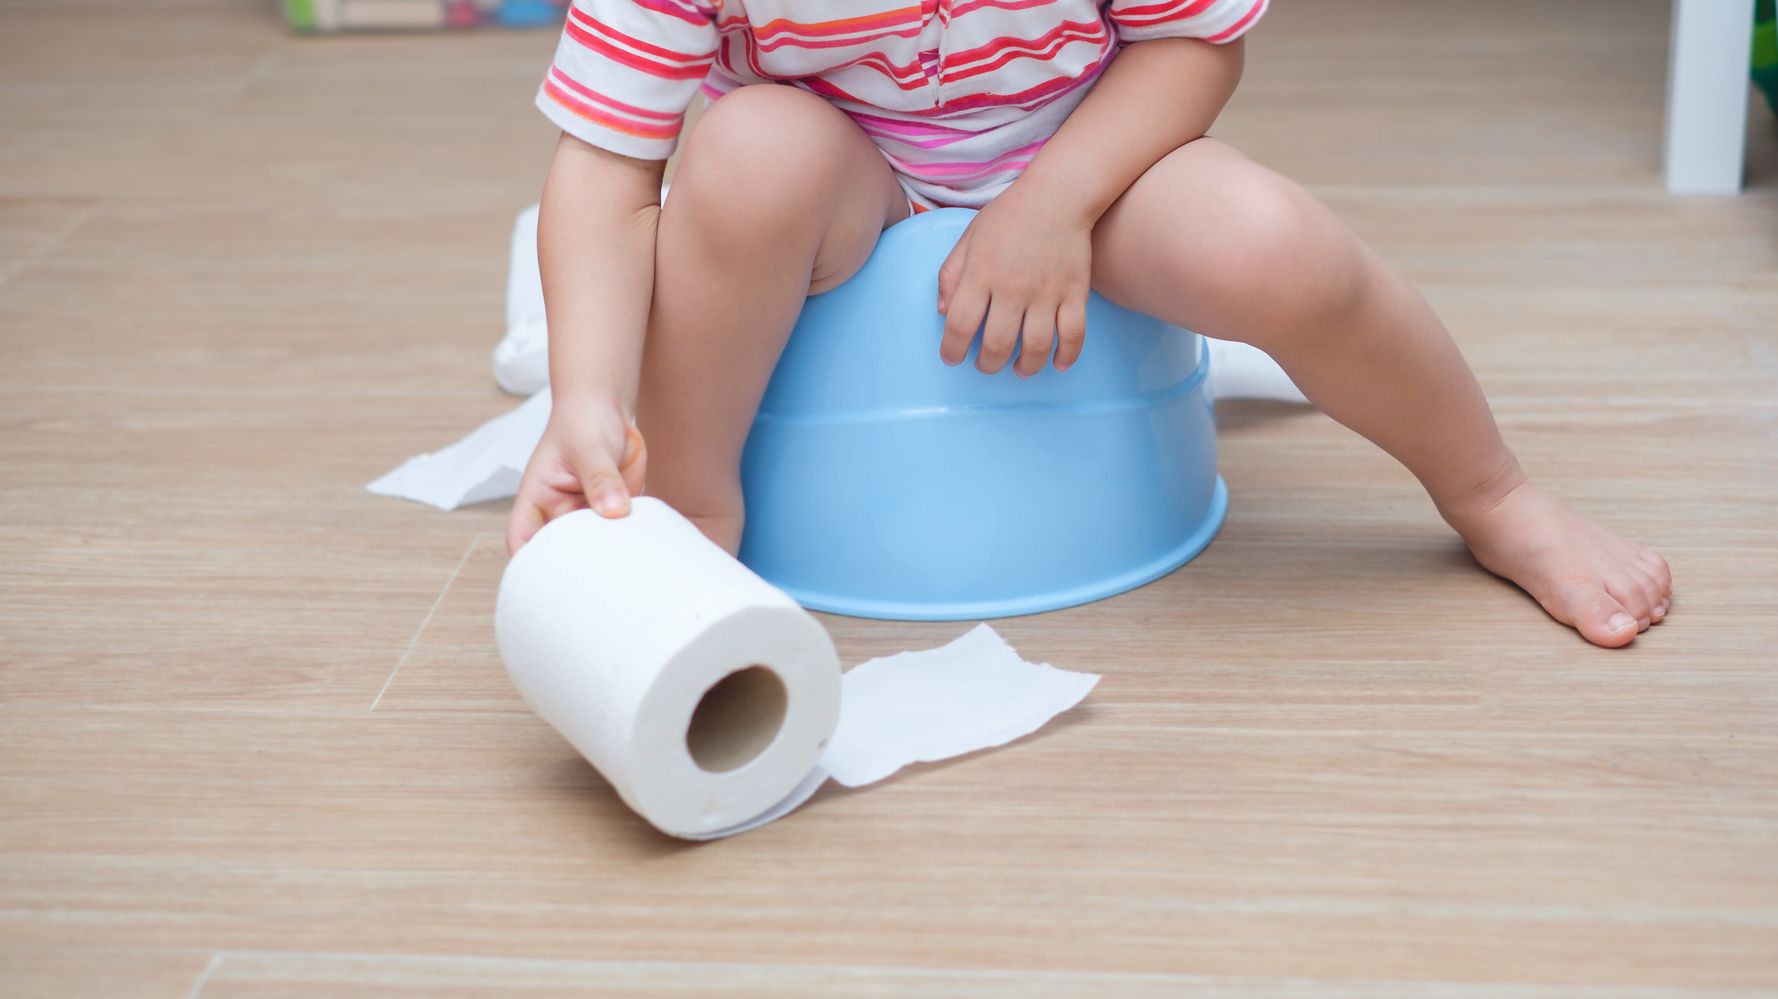 Pampers Easy Ups TV Spot, 'Potty Training Underwear for Toddlers